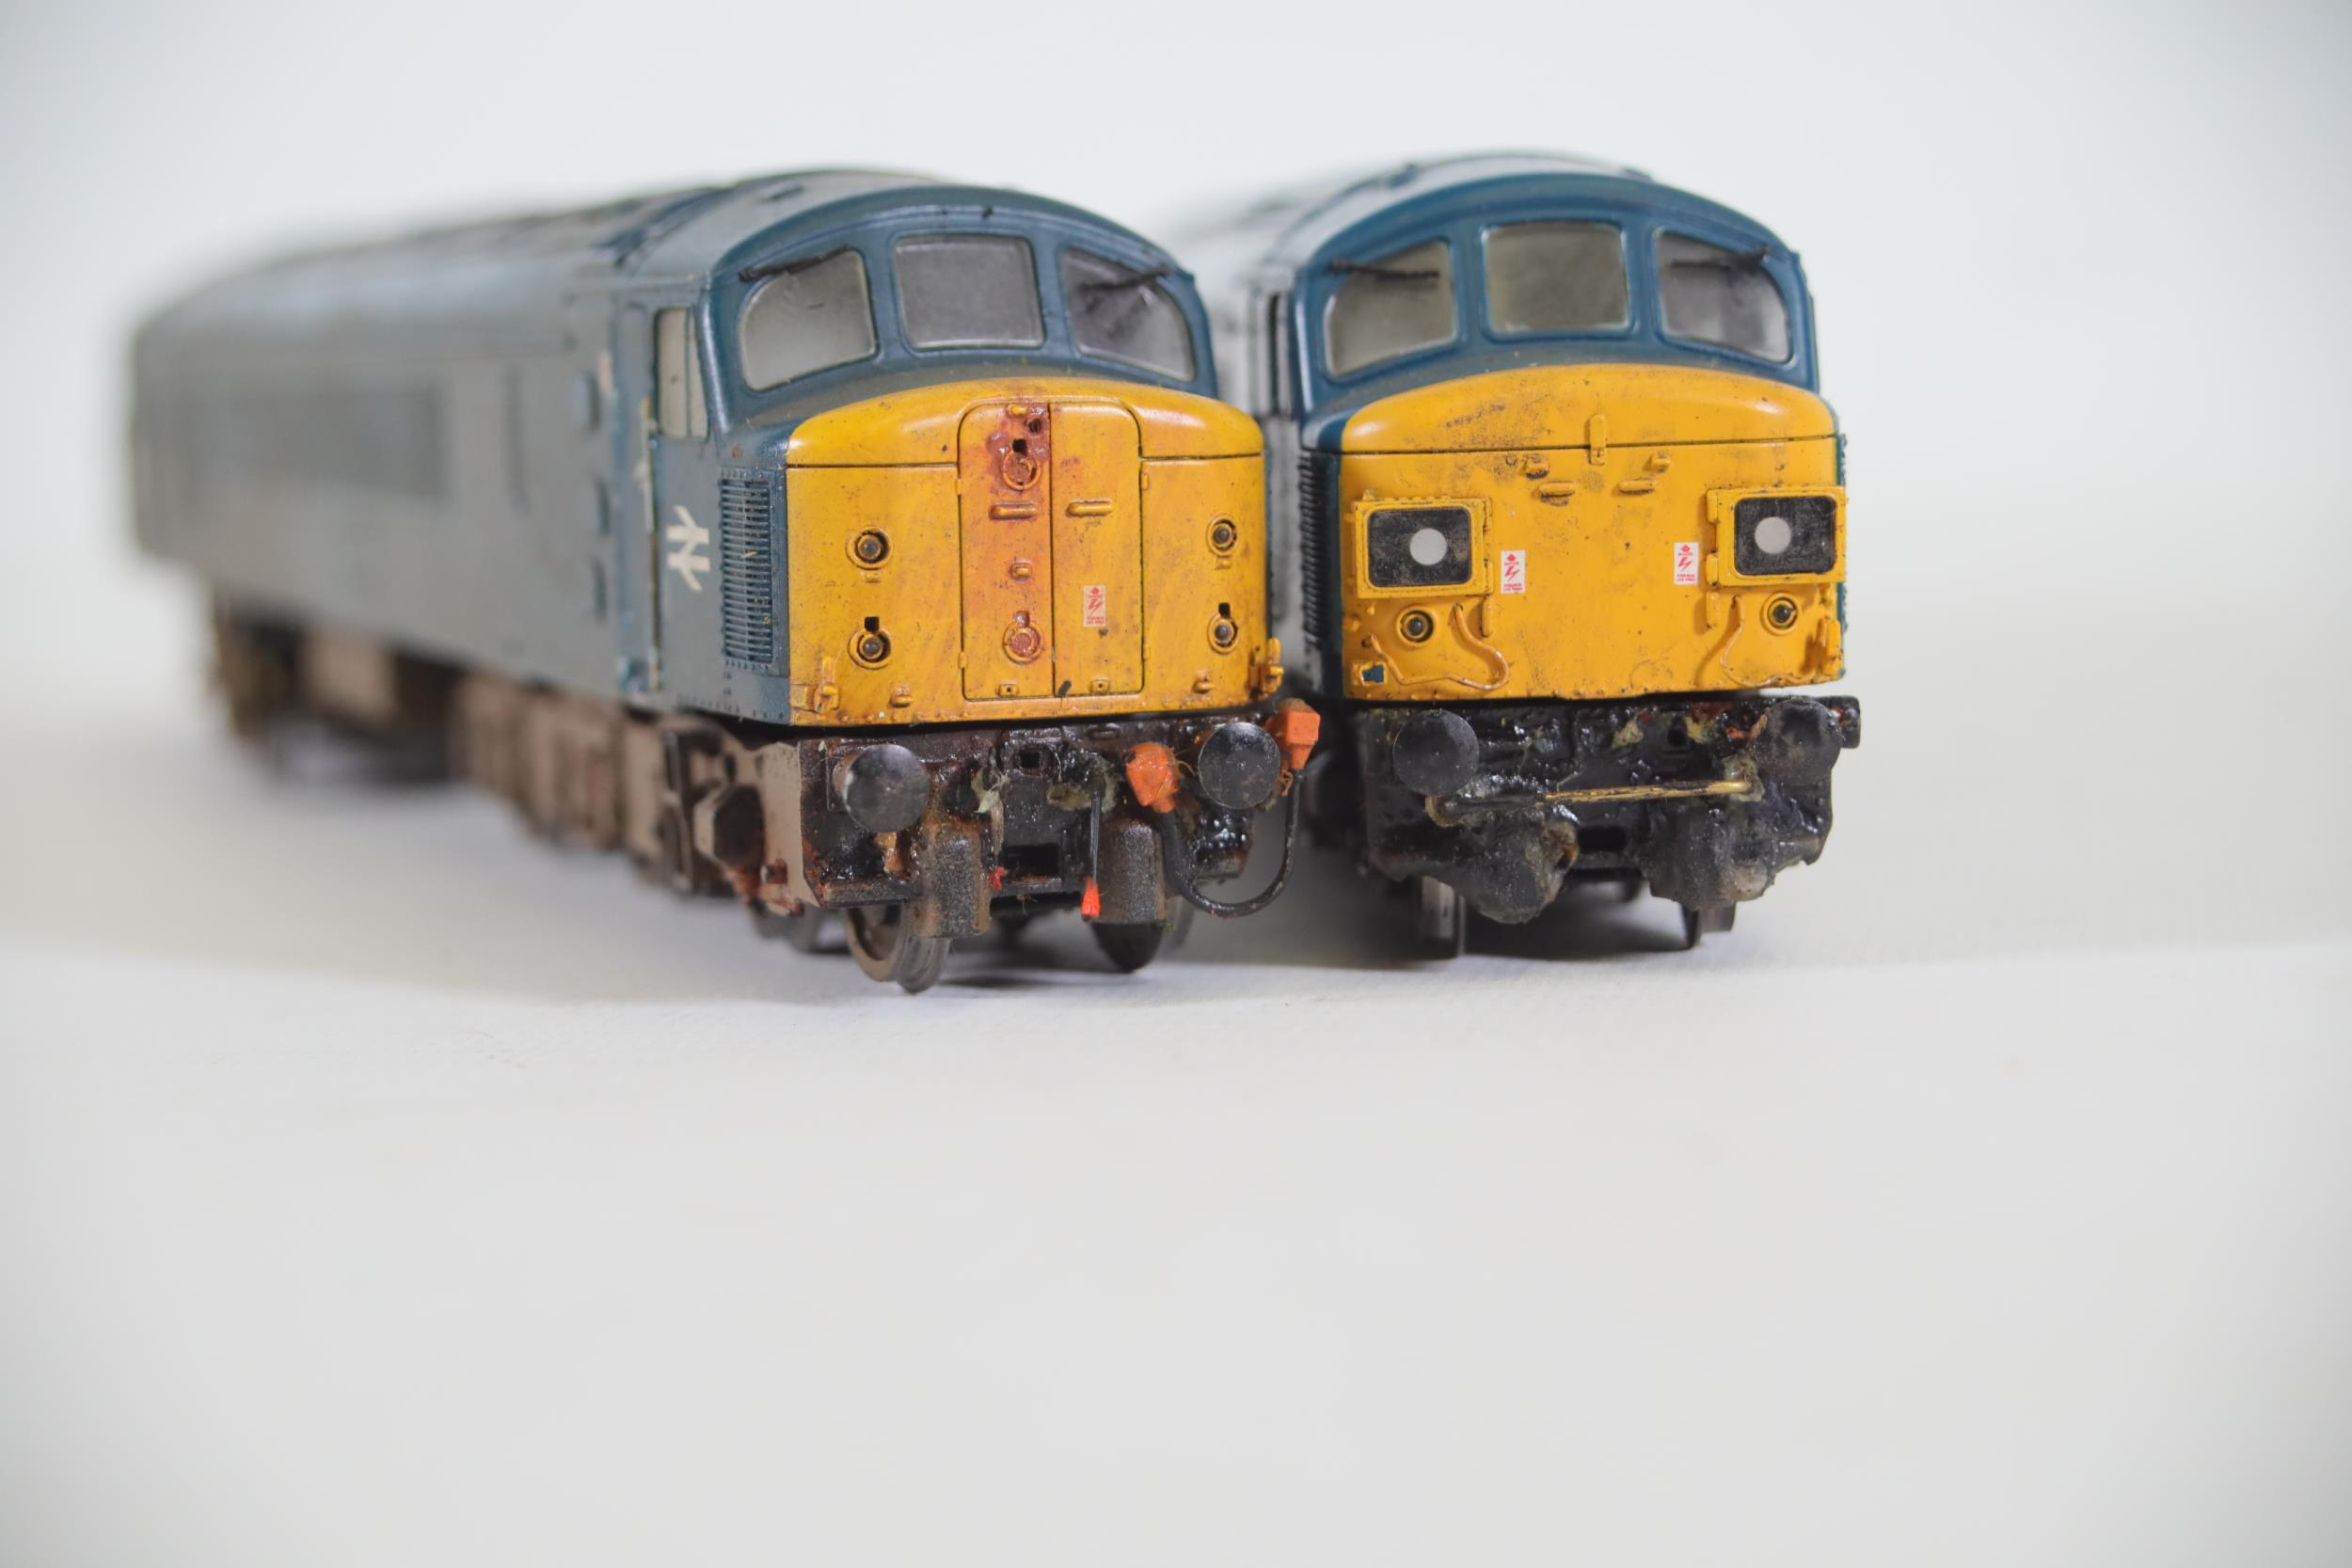 2 Bachmann OO Gauge Locomotives Br Blue Class 45 45120 and 45005 - Image 7 of 8